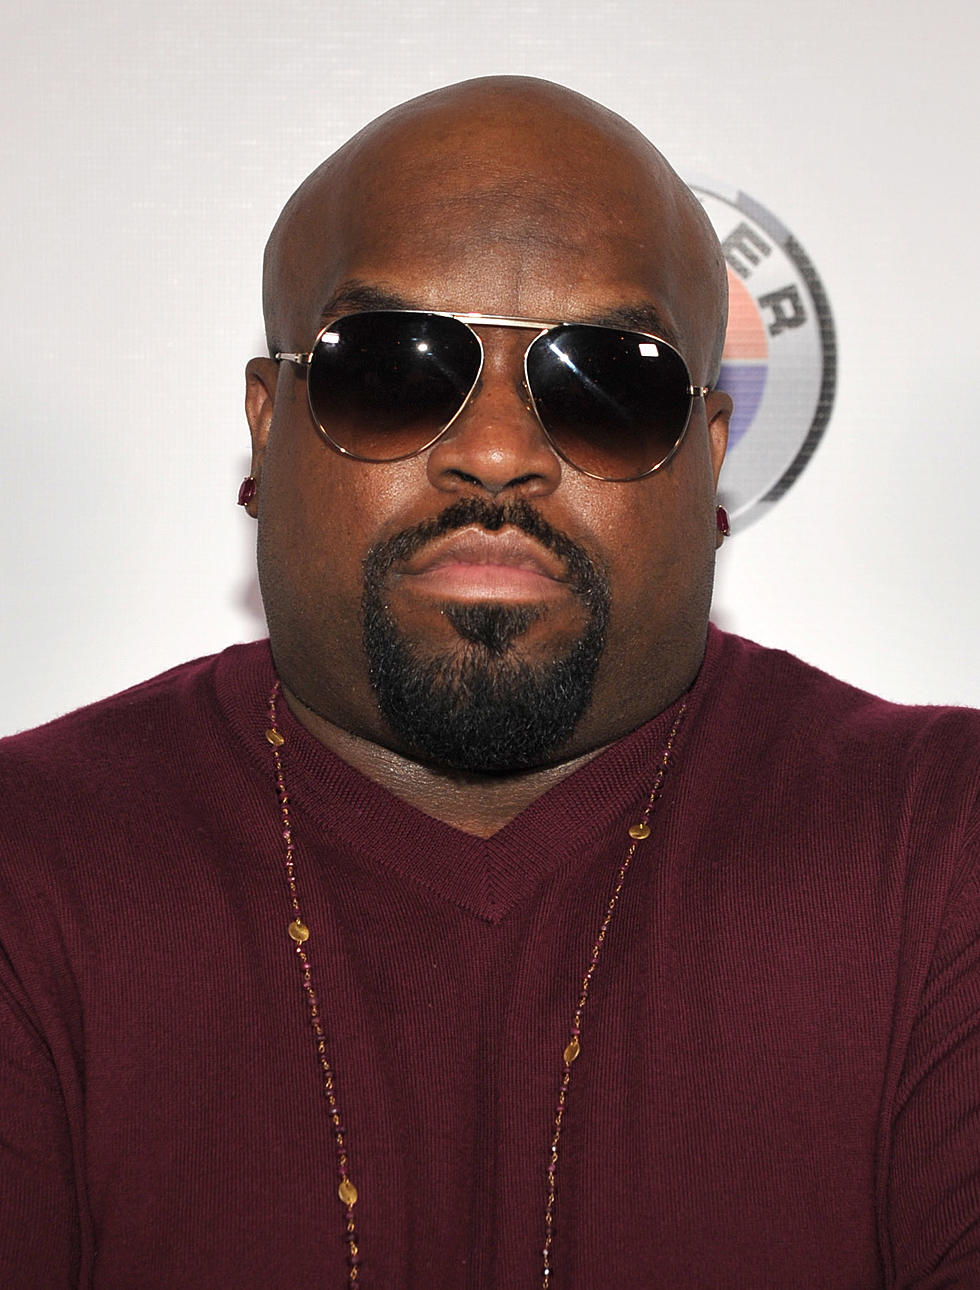 Cee Lo Green Joins Madonna – Super Bowl